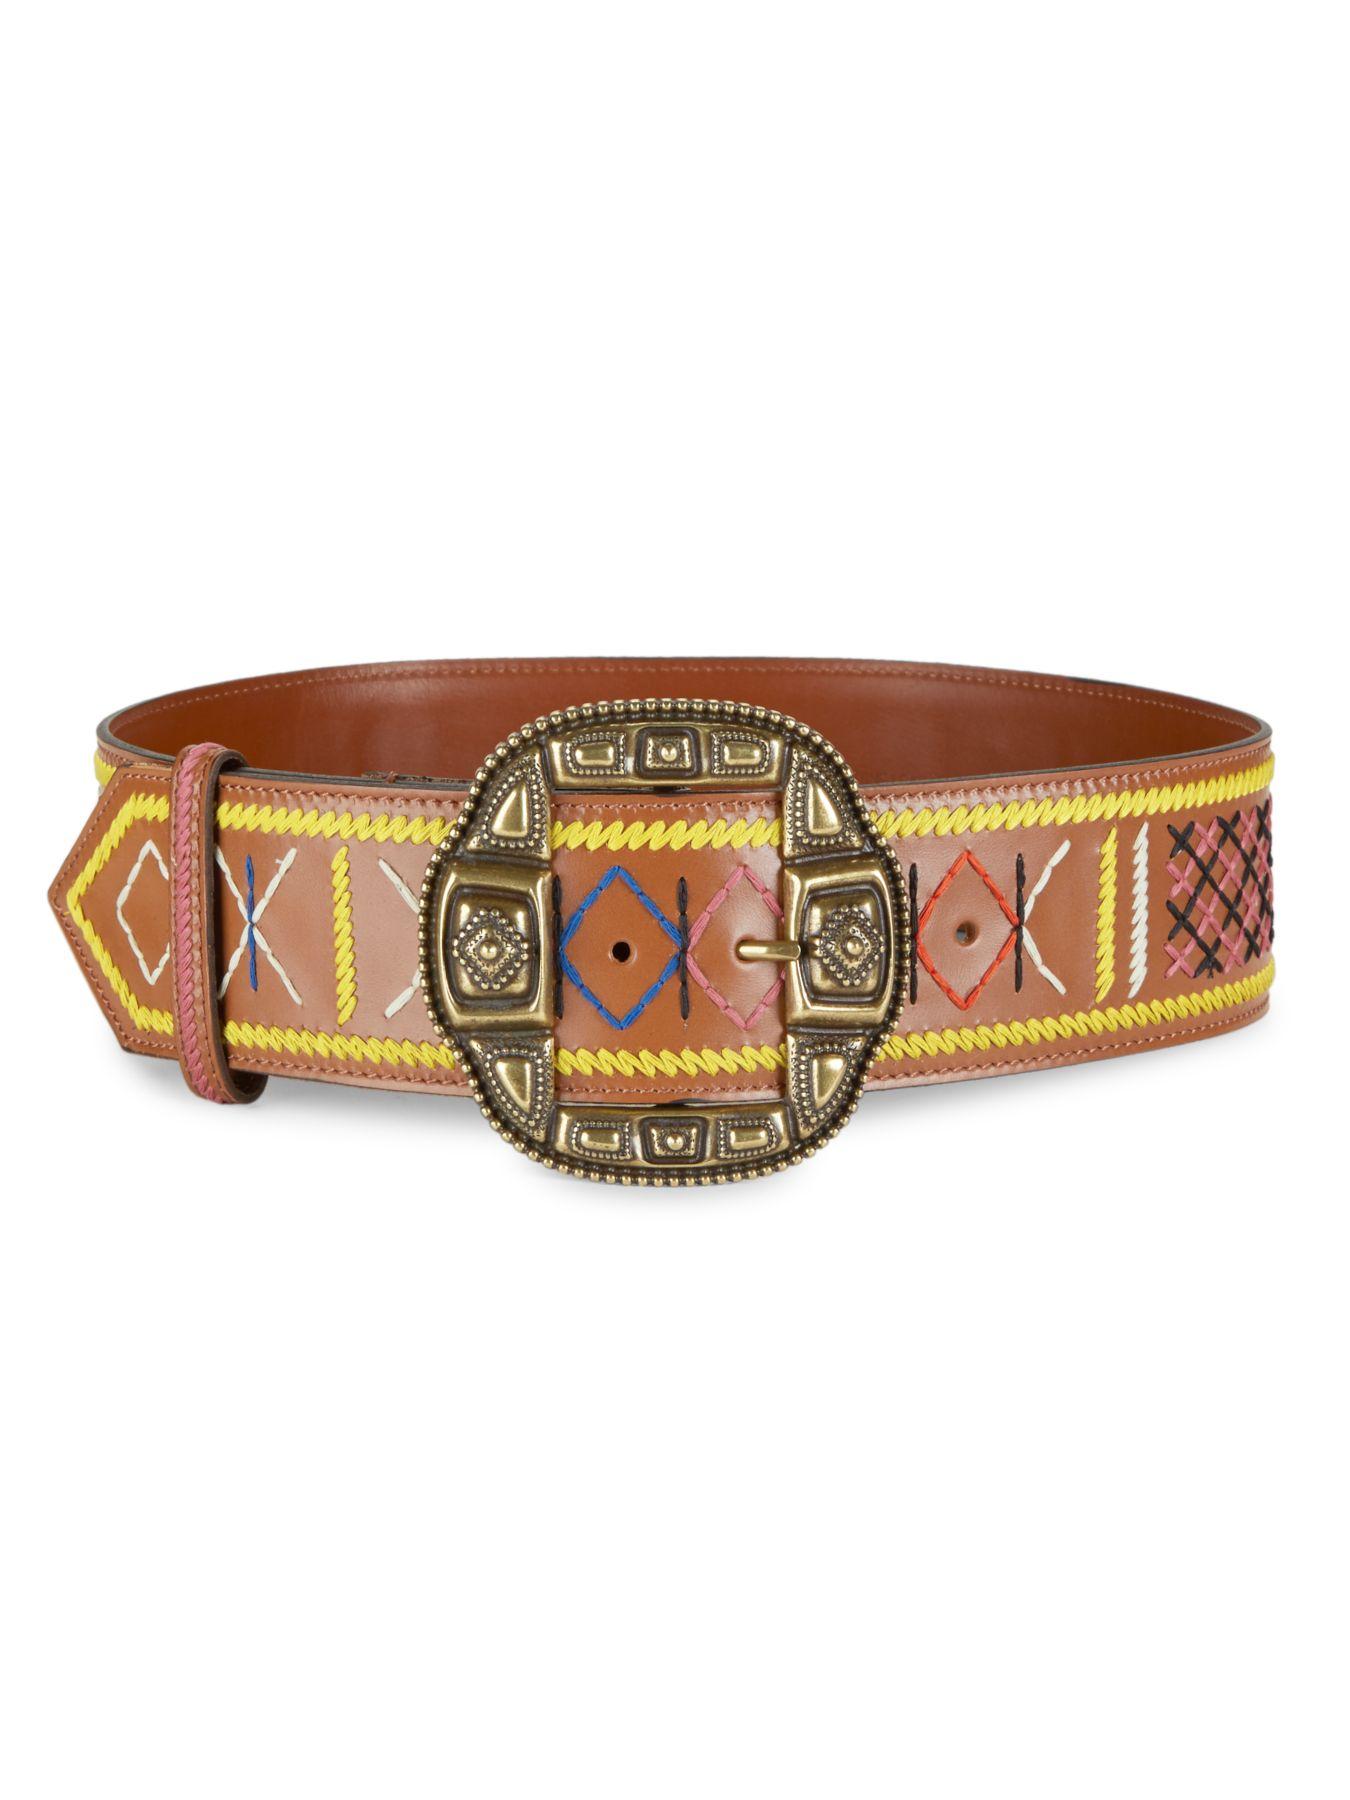 Etro Embroidered Leather Belt in Brown - Lyst